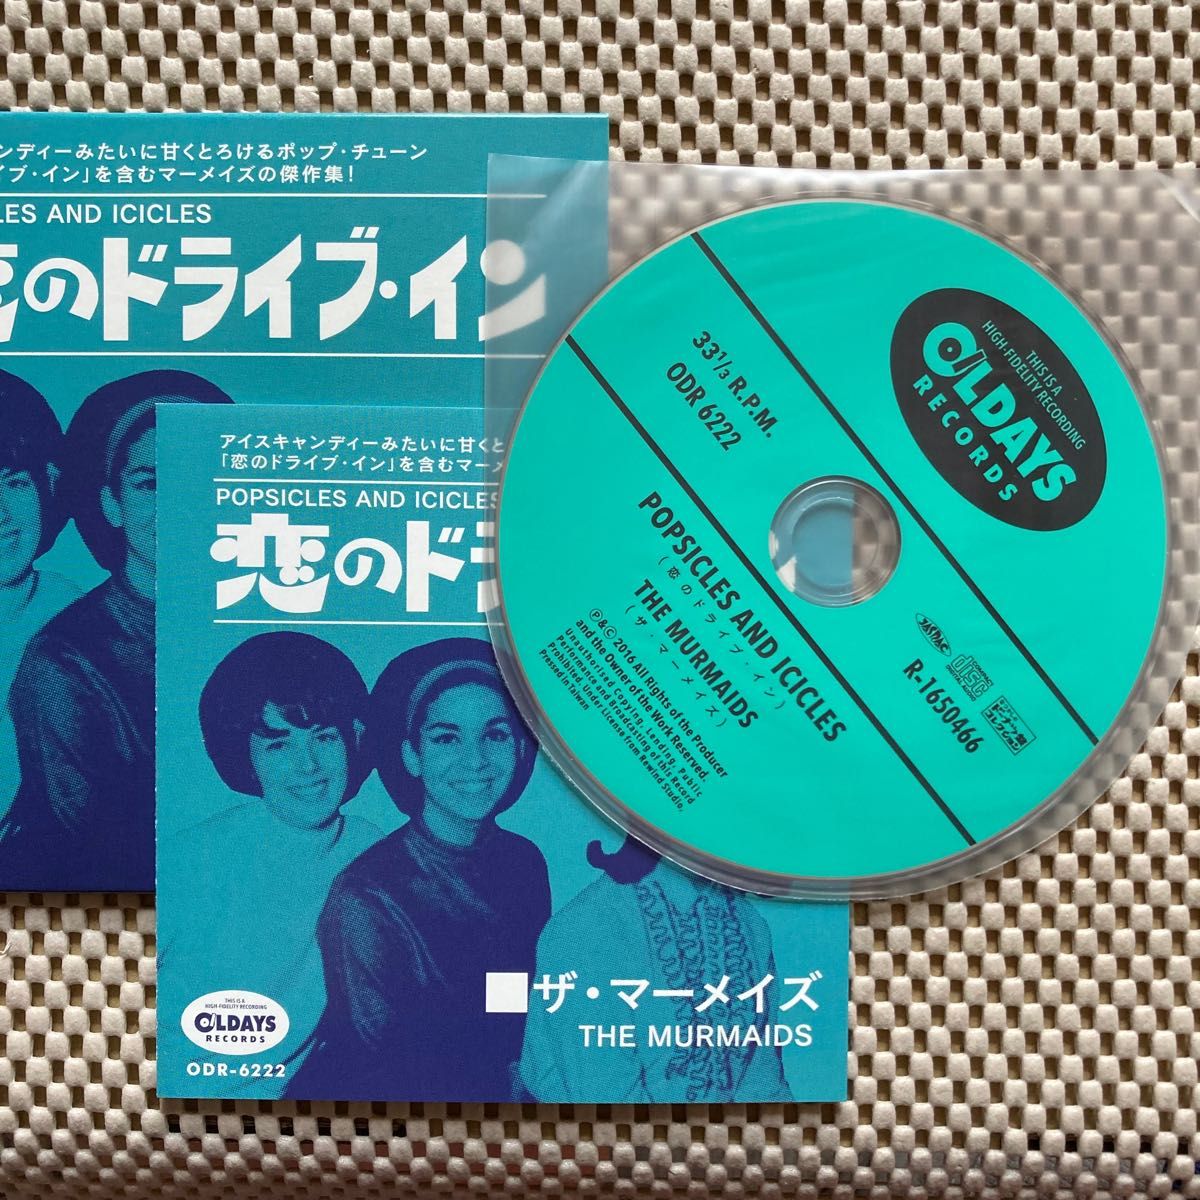 CD】The Murmaids Popsicles And Icicles（ザ・マーメイズ） 紙ジャケット｜PayPayフリマ